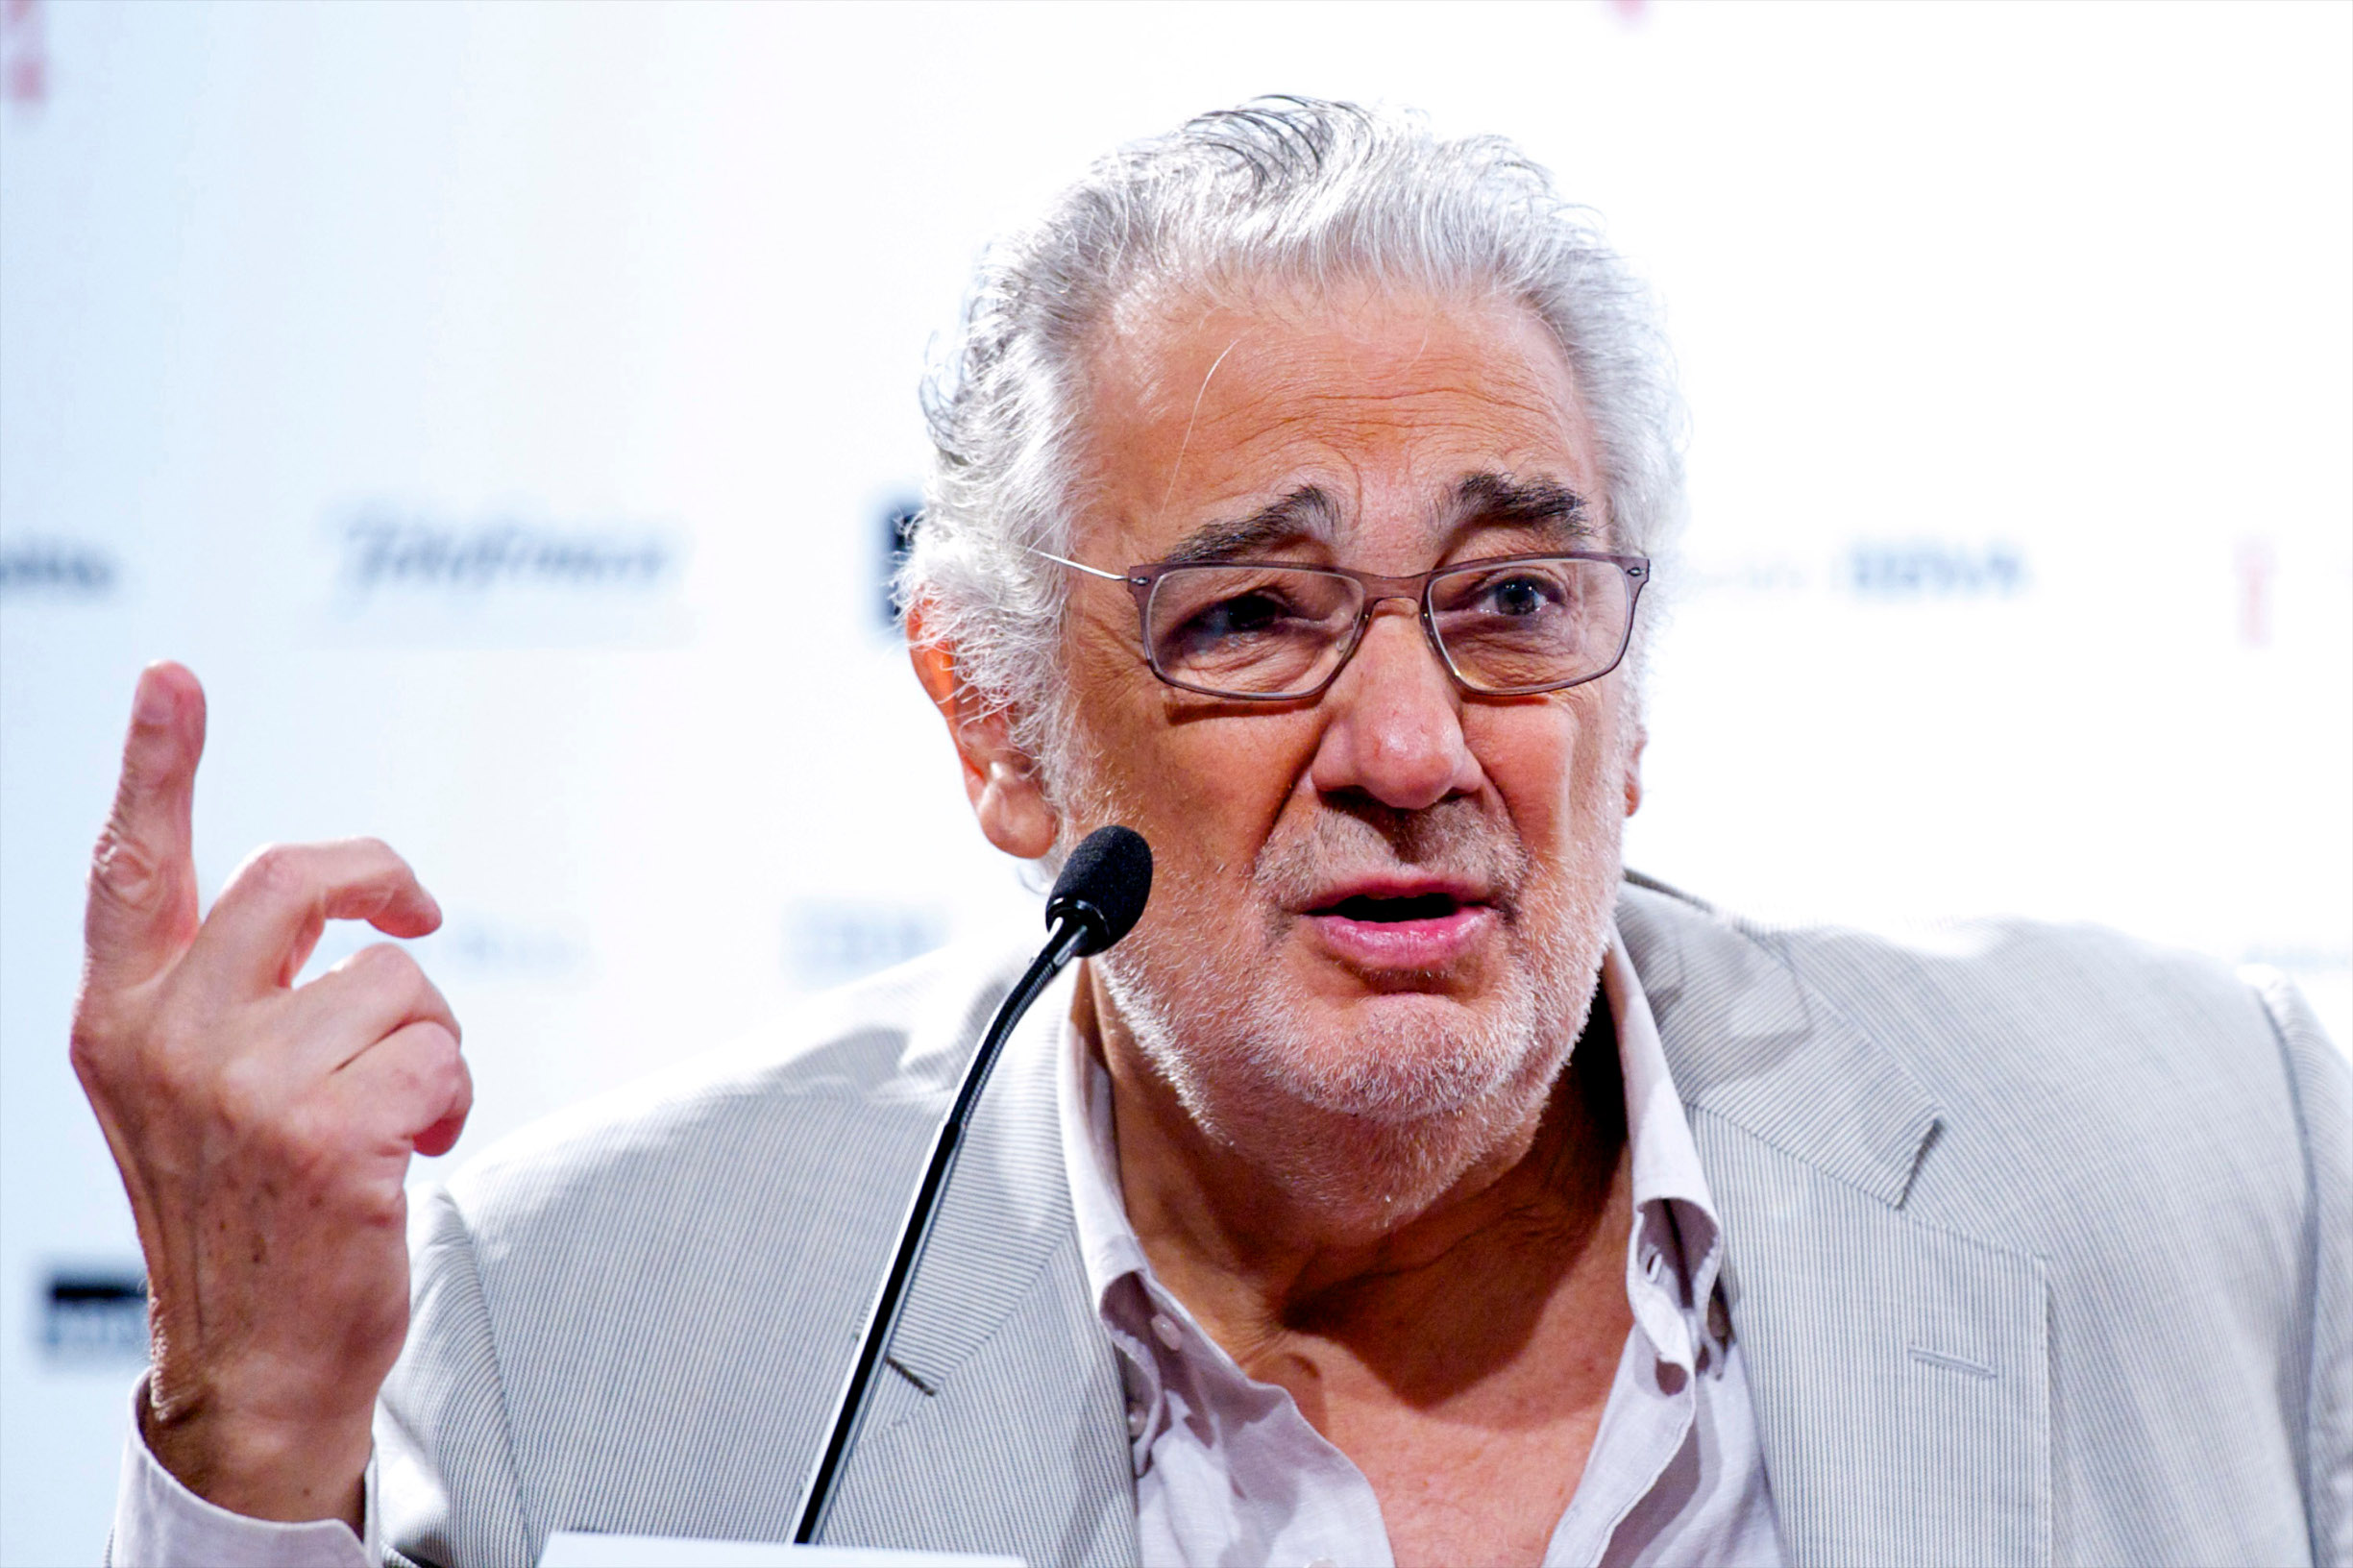 MADRID, SPAIN - JUNE 23:  Placido Domingo attends 'A Mi Espana' presentation at Teatro Real on June 23, 2014 in Madrid, Spain.  (Photo by Juan Naharro Gimenez/Getty Images)